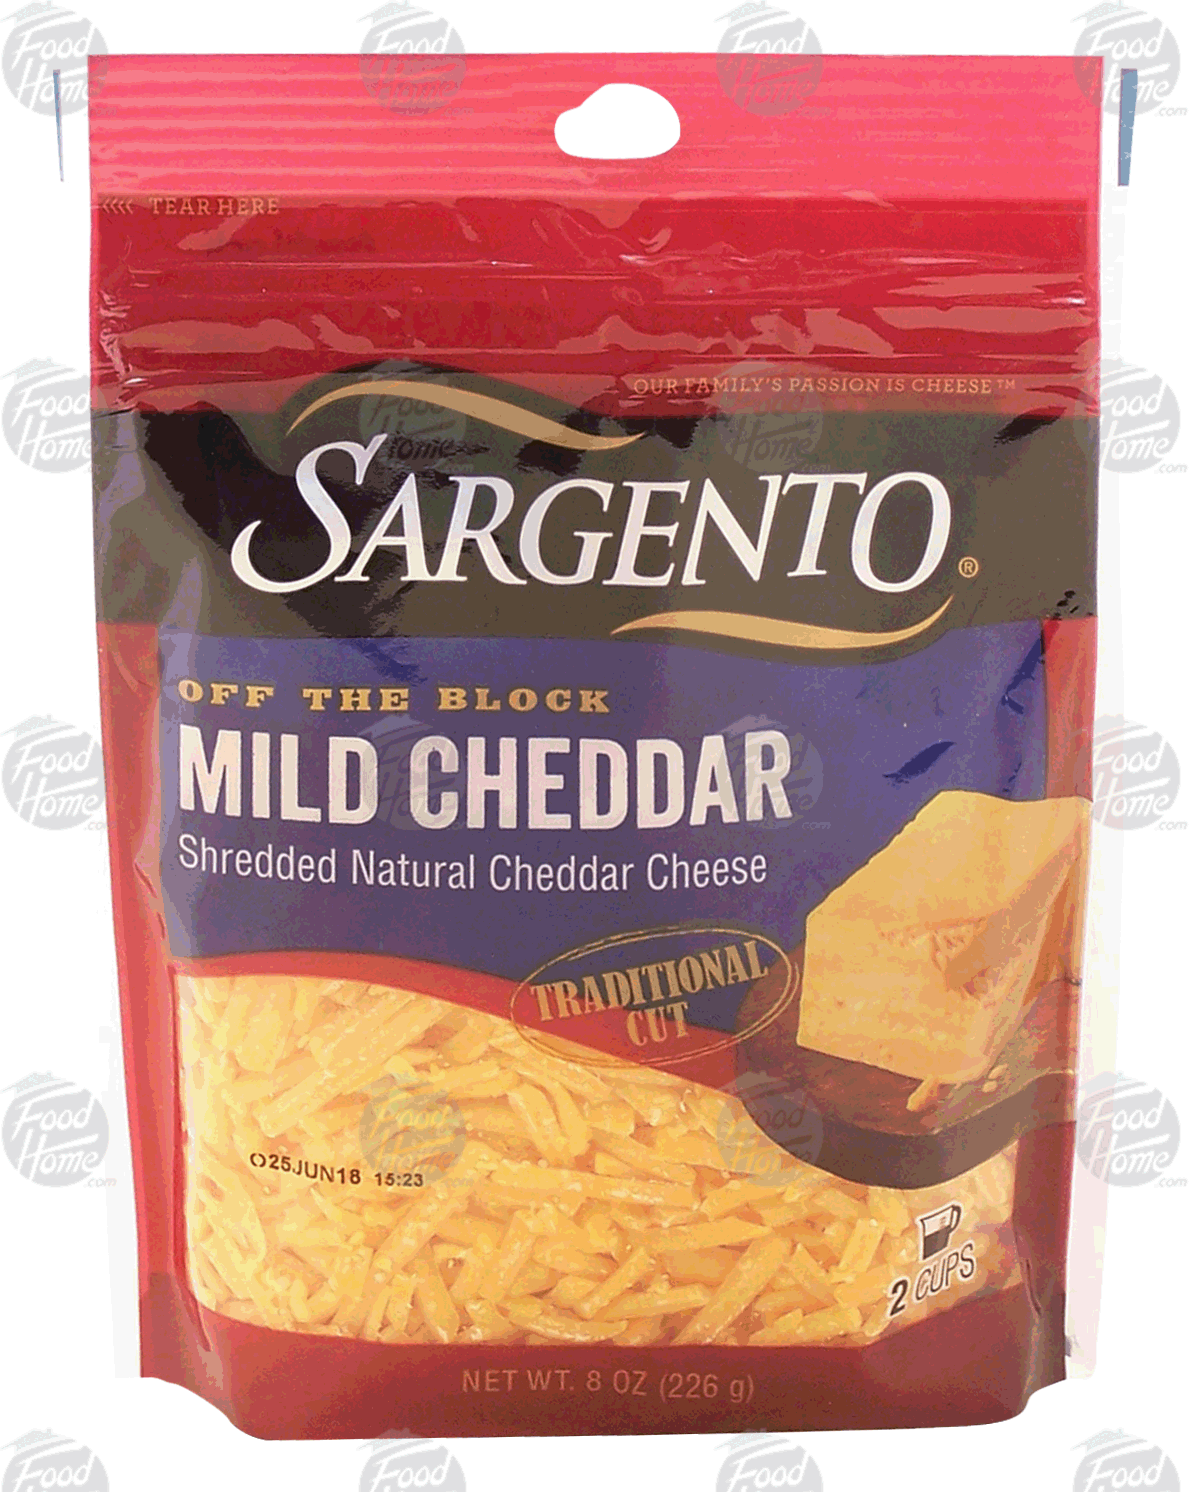 Sargento(R) Off the Block mild cheddar traditional cut shredded cheese, 2-cups Full-Size Picture